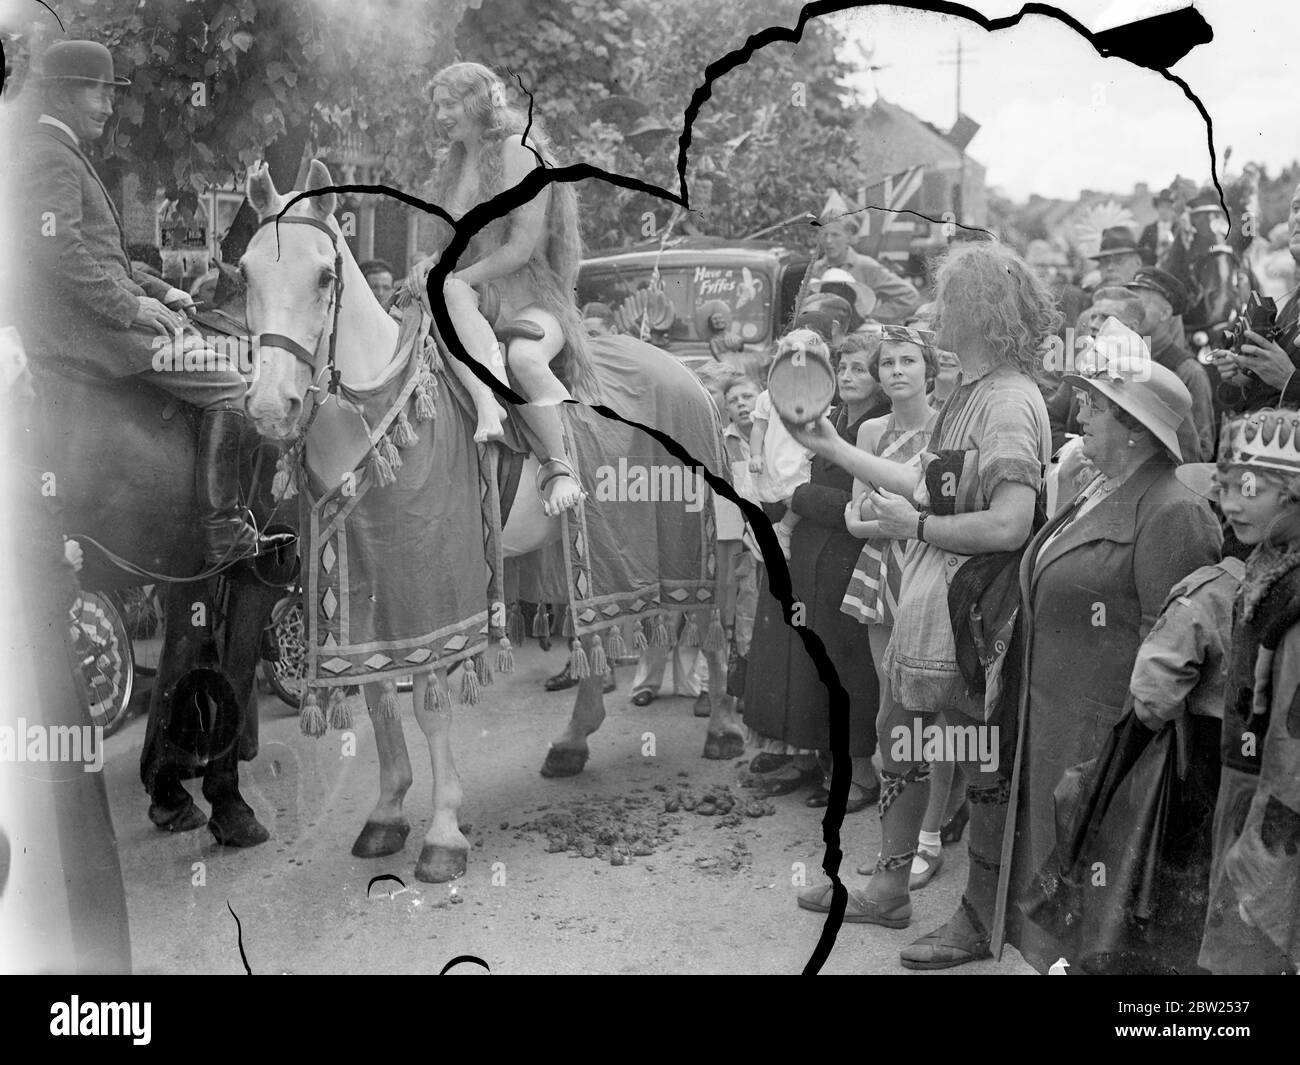 12 year old girl as 'Lady Godiva' in Teddington Carnival. Mirabelle Muller, the 13 year old schoolgirl, rode on a white horse as 'Lady Godiva' in the Carnival Fate procession at Teddington, middlesex. Mirabelle was asked to leave her convent school after she had been chosen as Godiva. Phpto shows, a general view of the Carnival procession, showing Mirabelle Muller as Lady Godiva.. 6 July 1938 Stock Photo